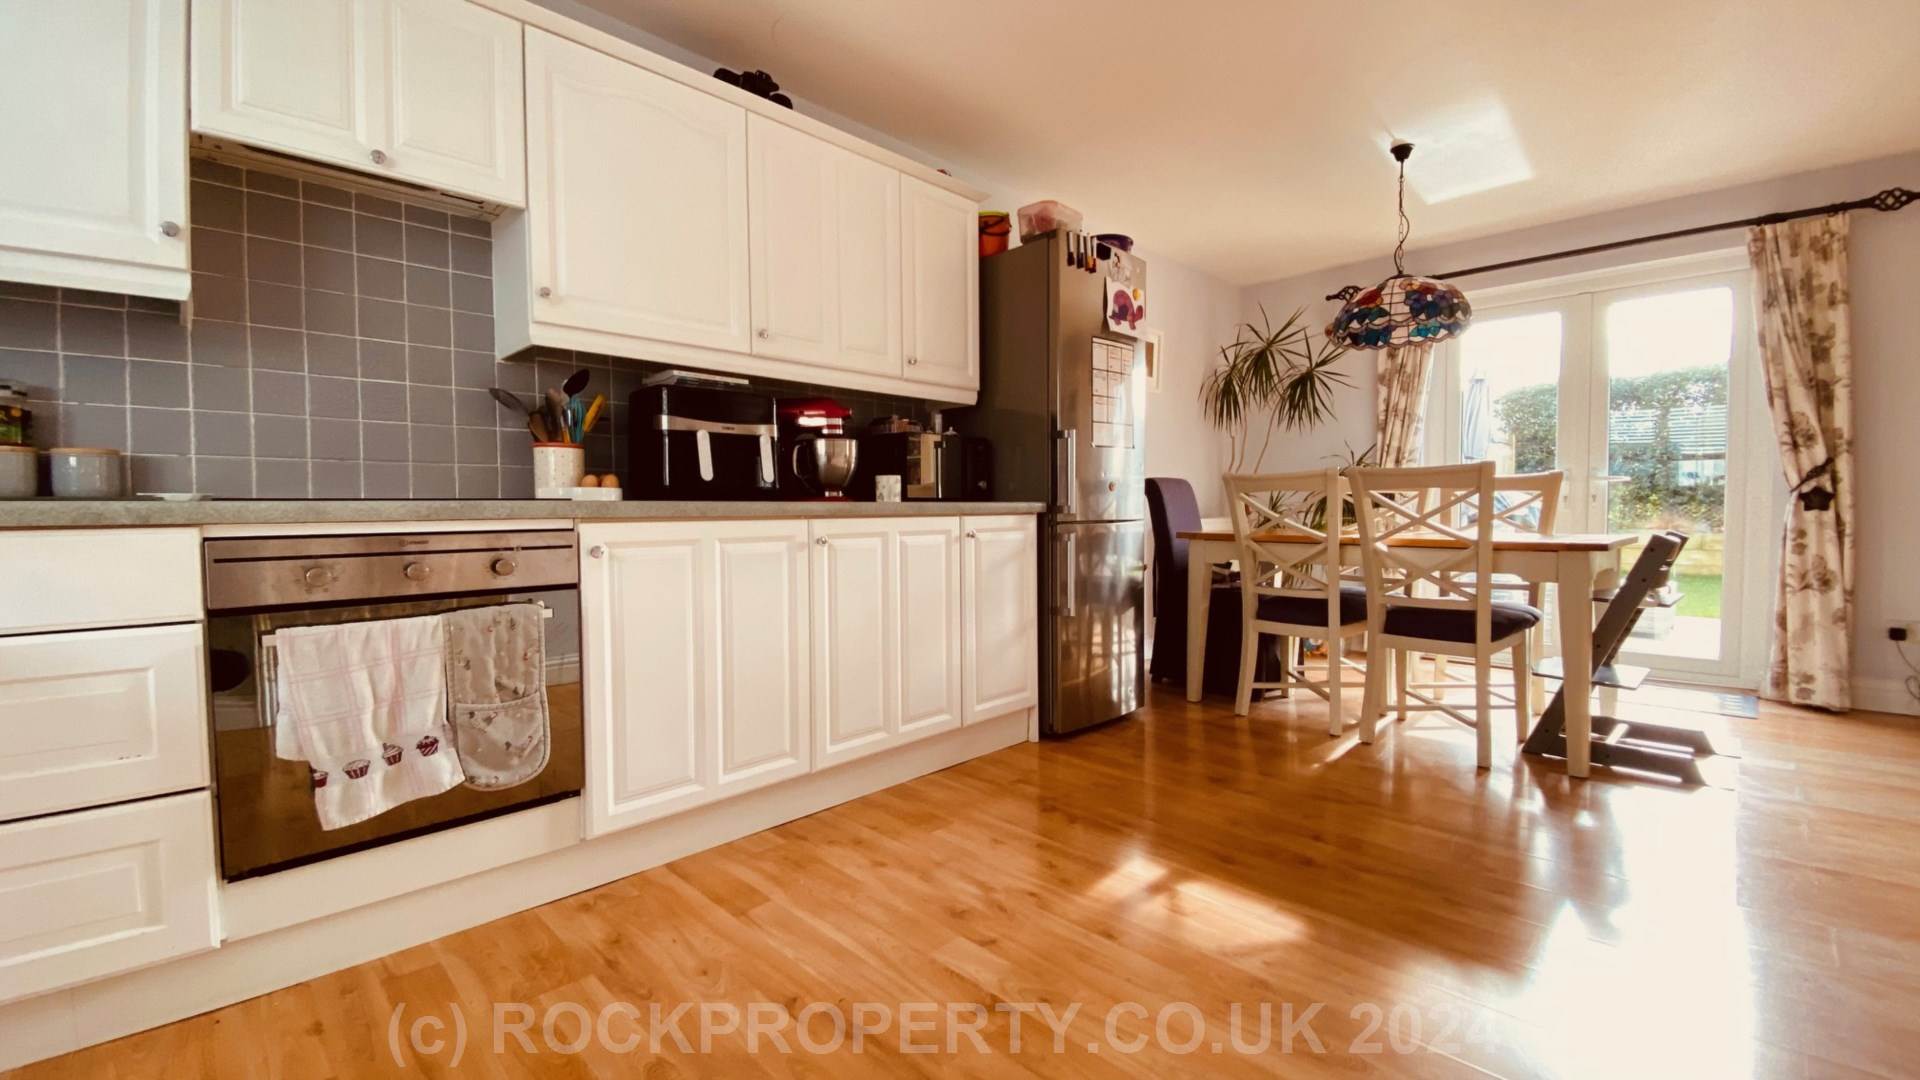 3 DOUBLE BED FAMILY HOME, Popular Sion Village, St John, Image 8